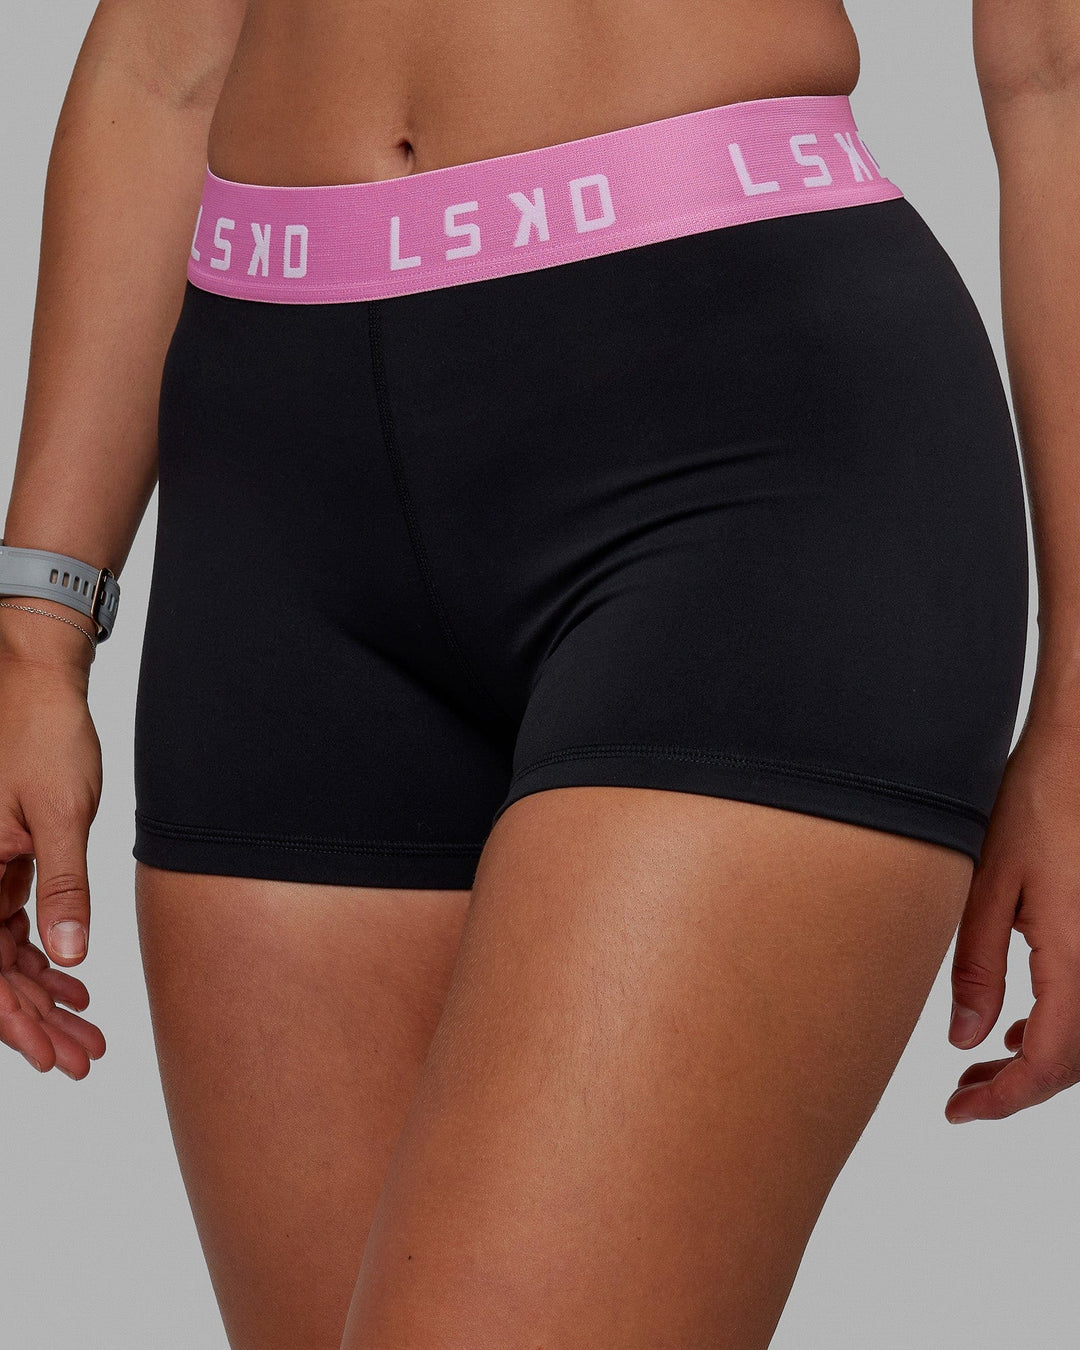 Woman wearing Extend X-Short Tights - Black-Spark Pink